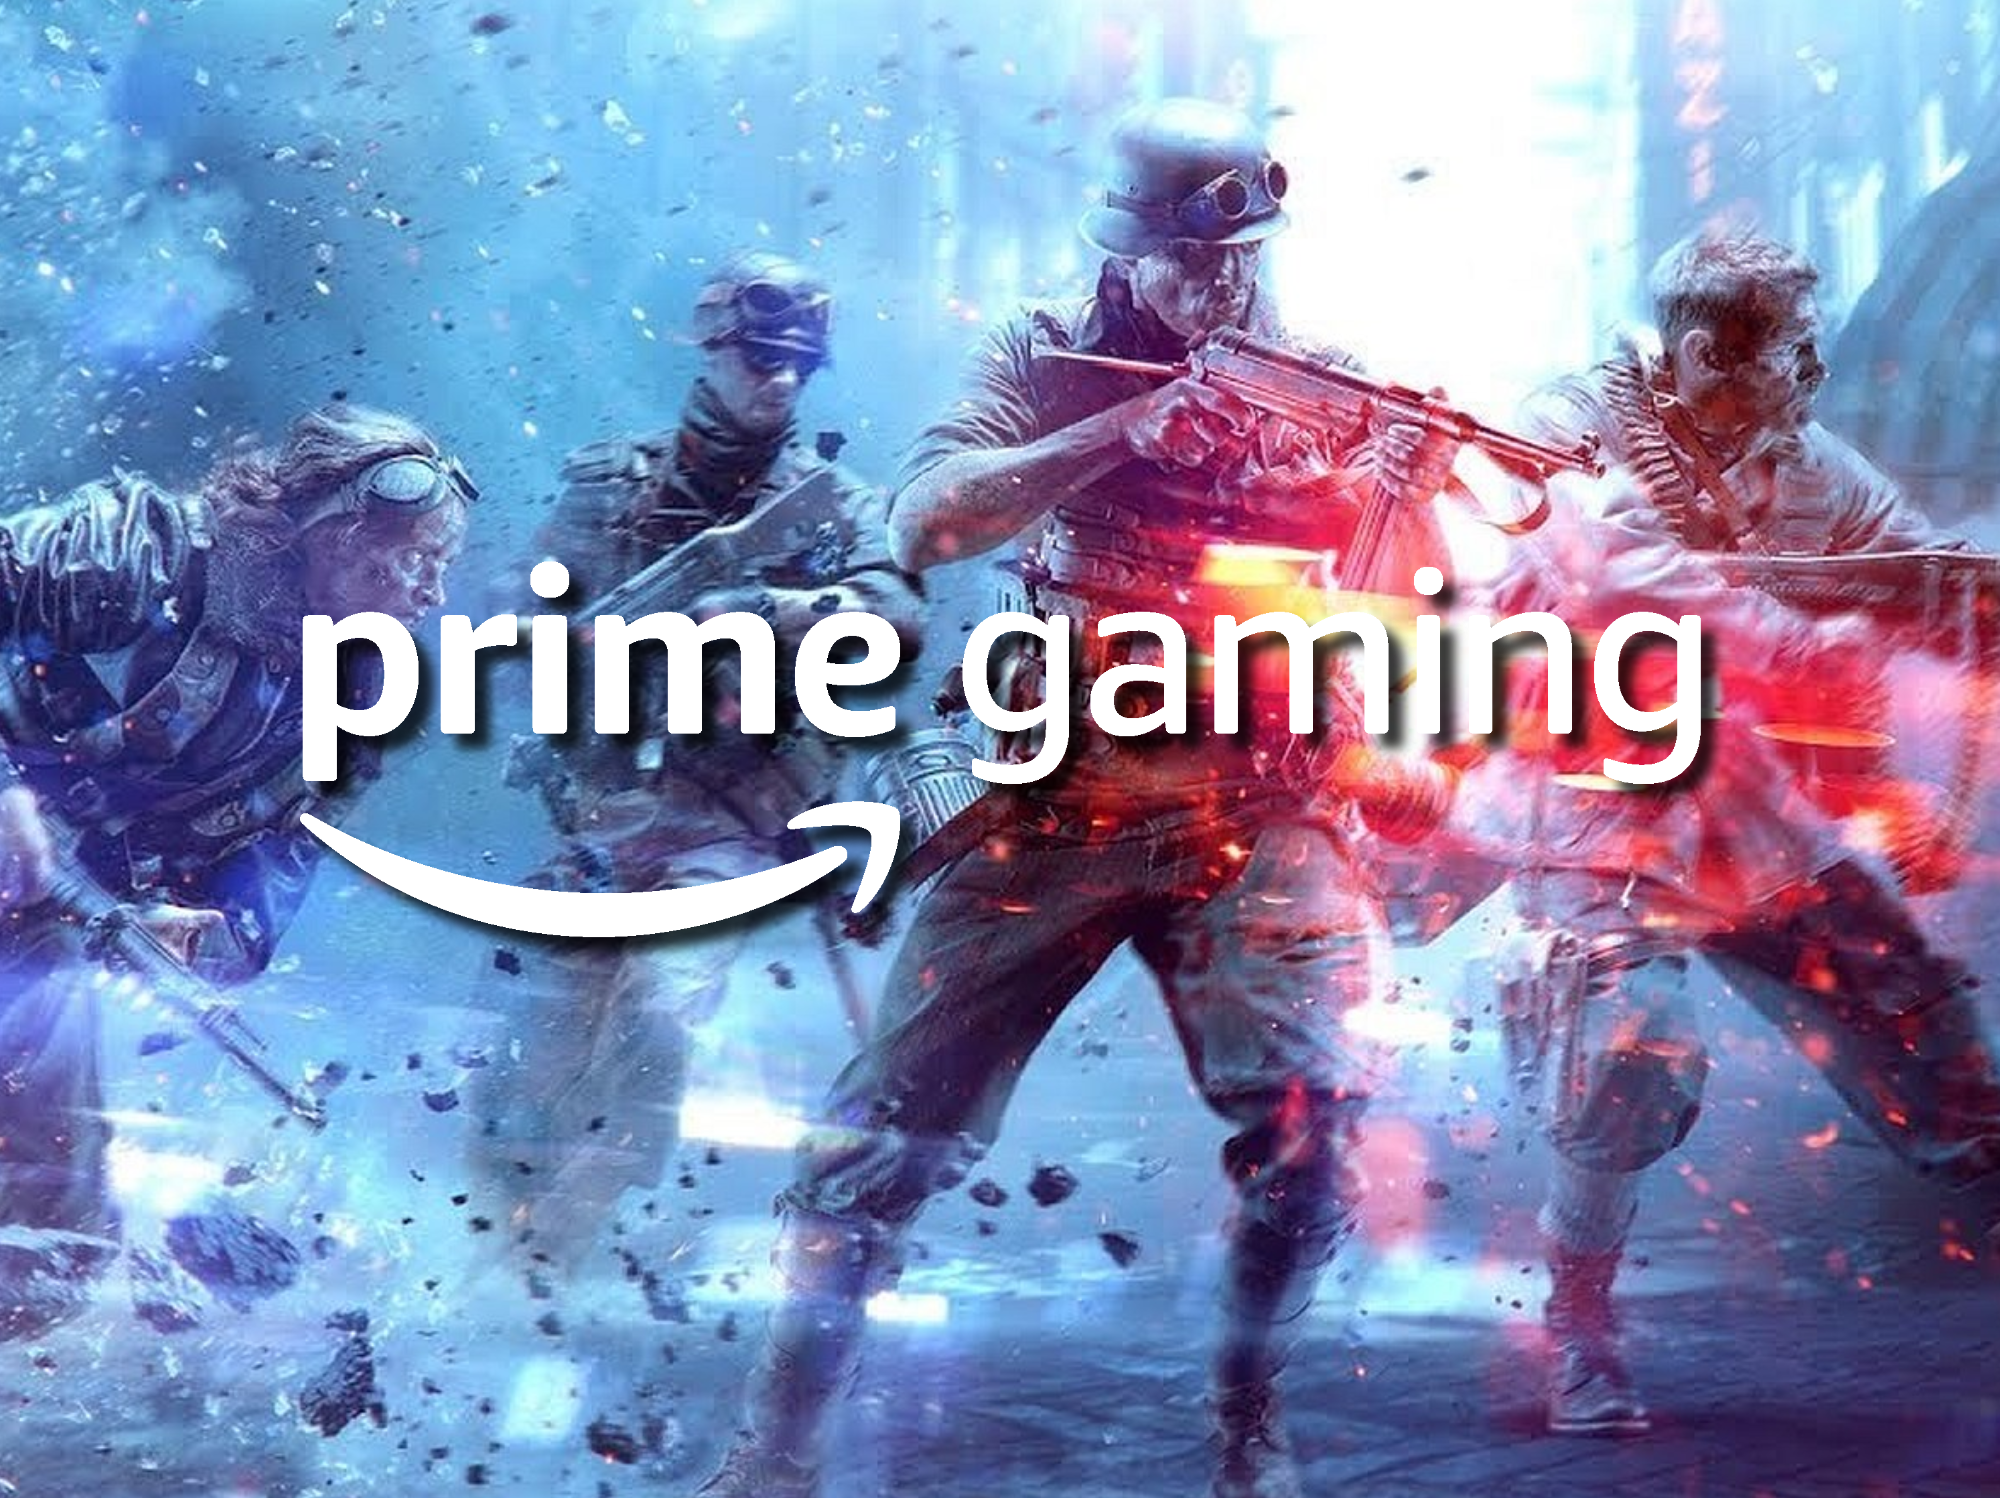 How to claim Battlefield V for free with Prime Gaming